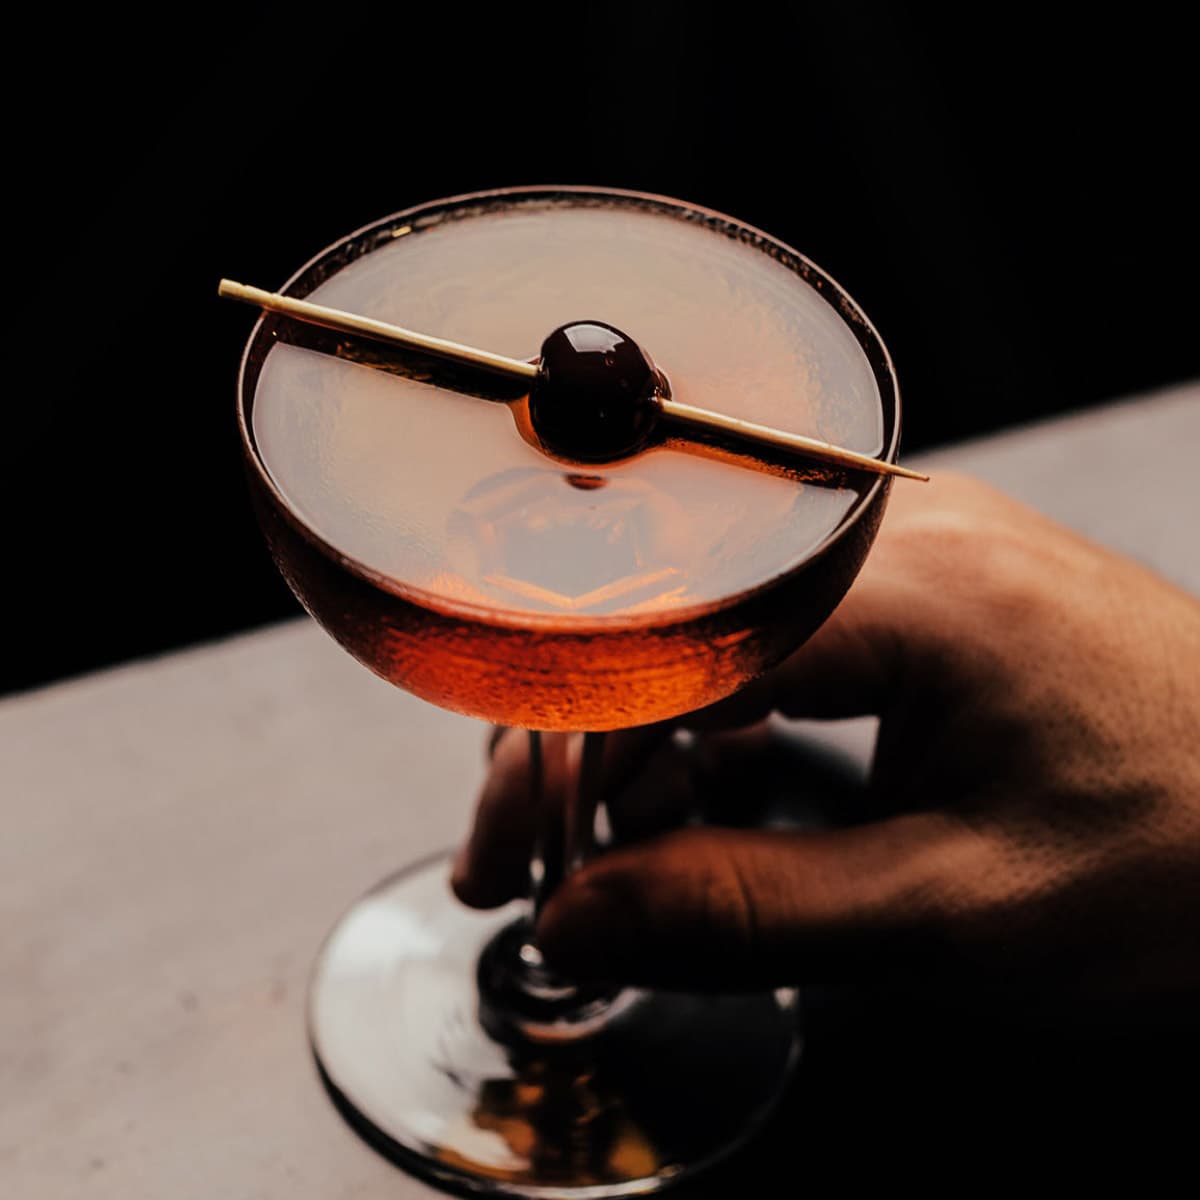 manhattan cocktail in a coupe glass garnished with a cherry. someone's hand holding the cocktail